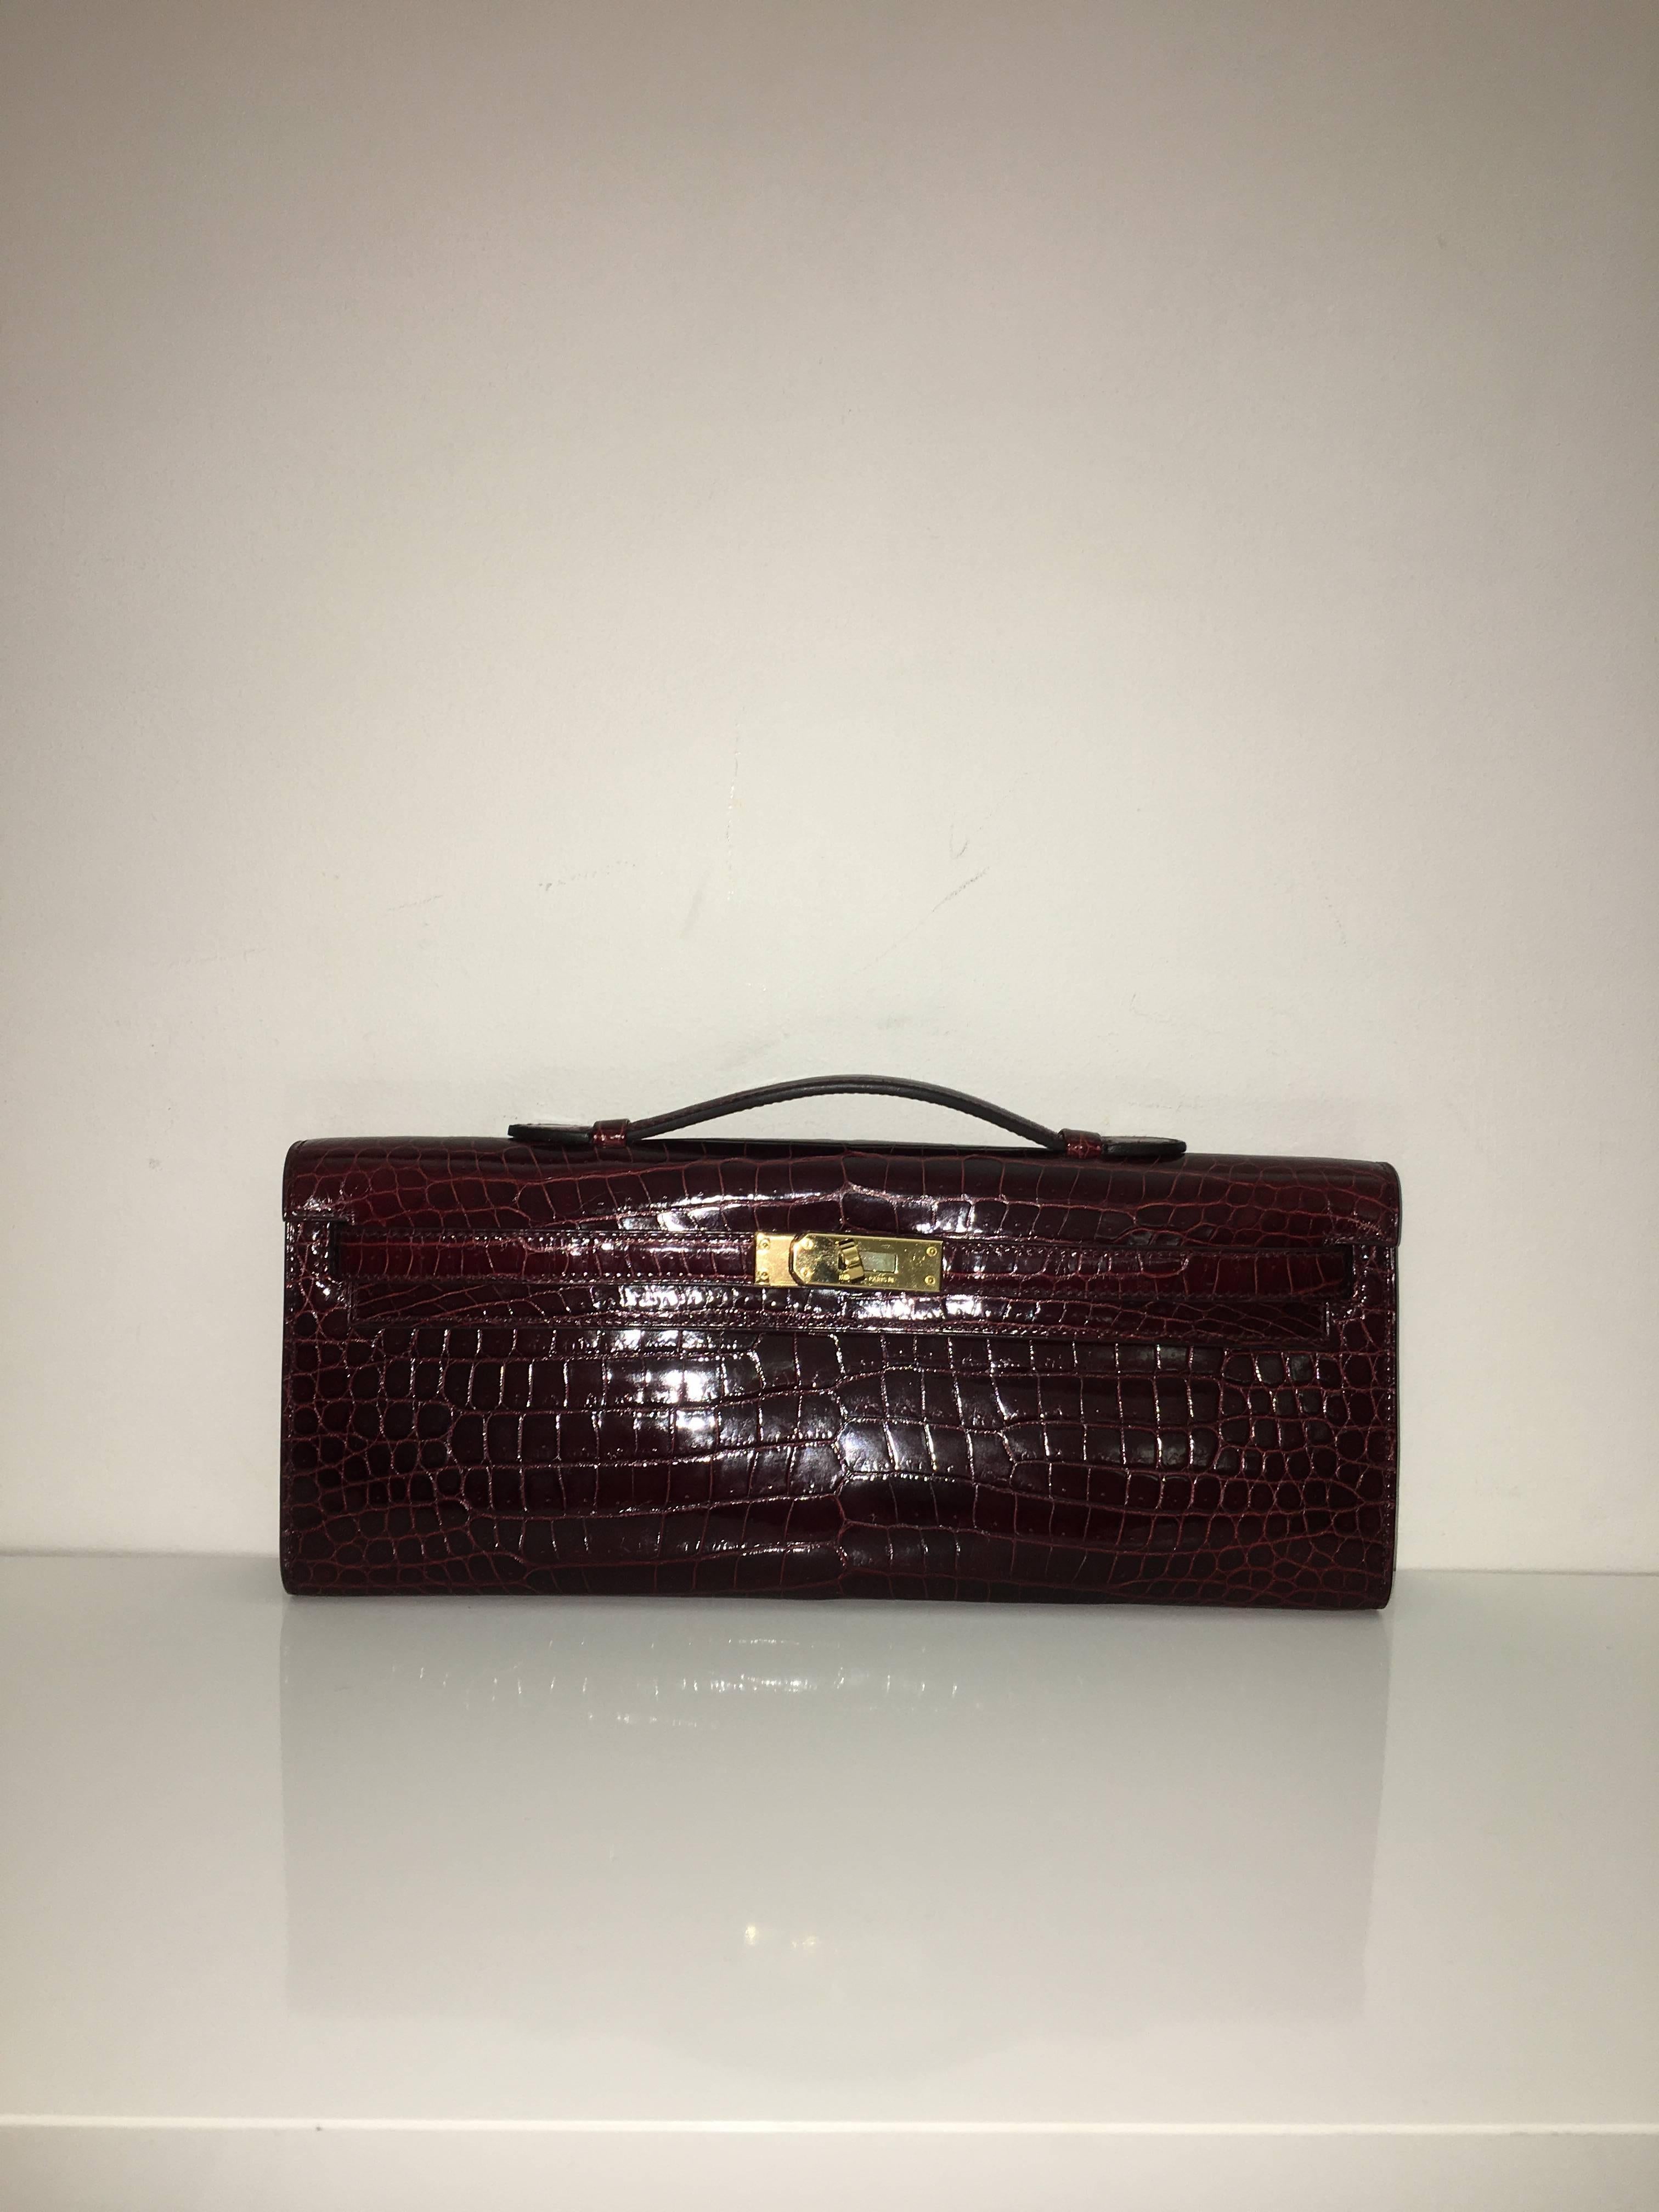 Hermes 
Kelly Cut
Shiny Crocodile Skin
Colour Bourgogne
Gold Hardware 
store fresh, comes with receipt and full set (dust bag, box...) 
Hydeparkfashion specializes in sourcing and delivering authentic luxury handbags, mainly Hermes, to client